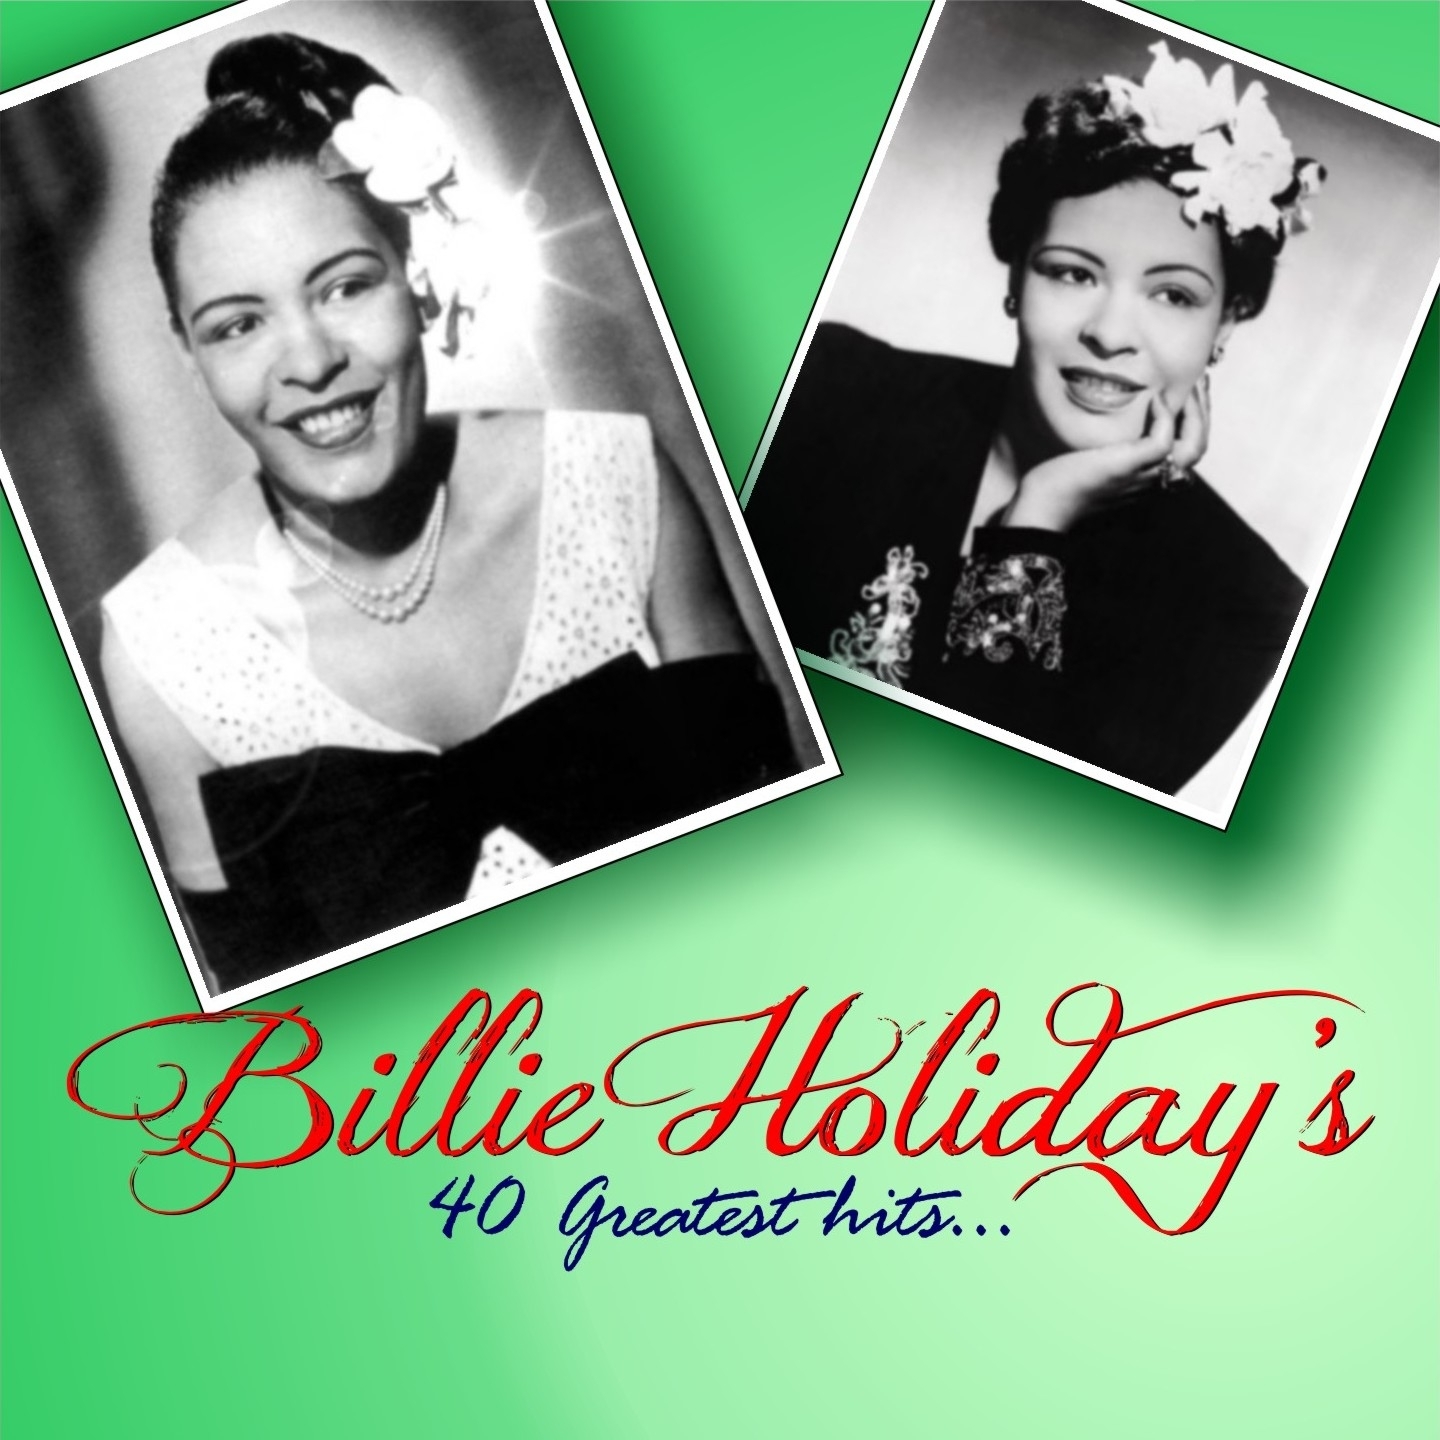 Billie Holiday's 40 Greatest Hits